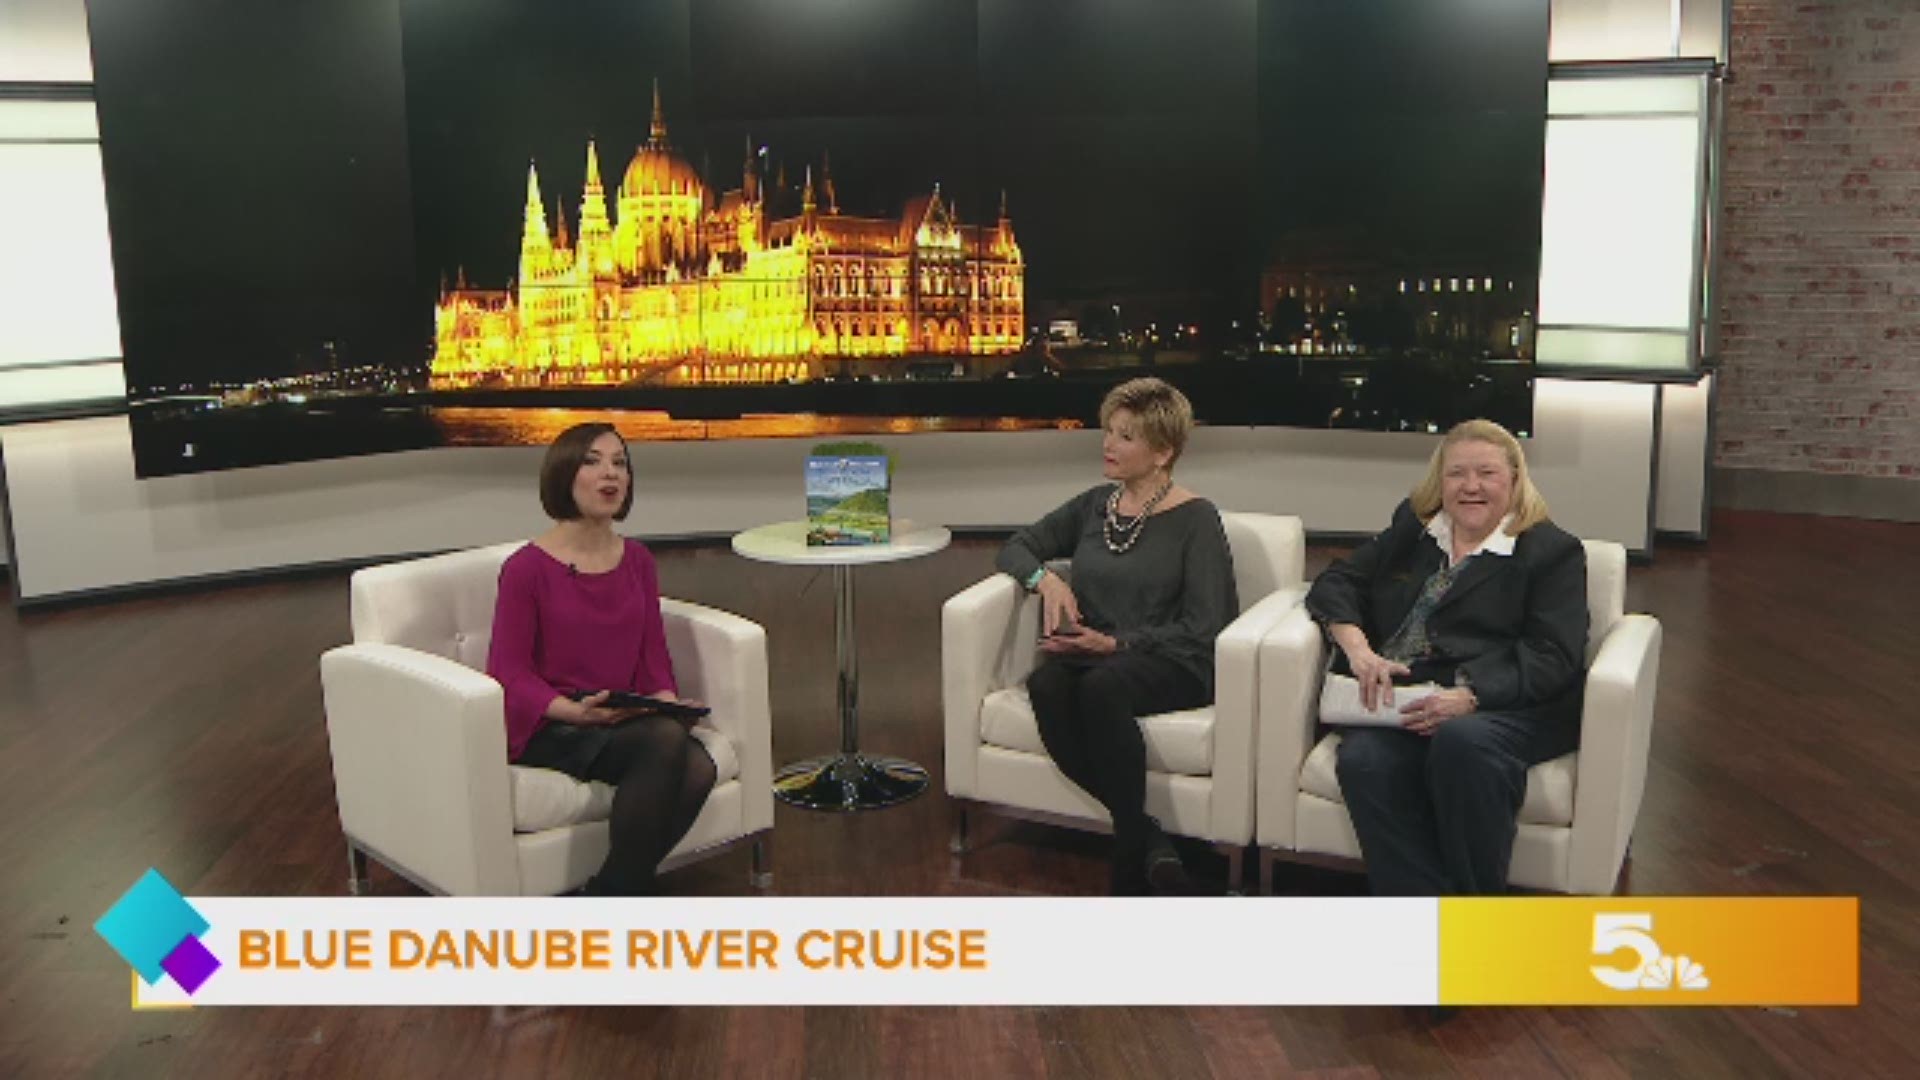 Travel Europe from the comfort of a cruise with Holiday Vacations’ Blue Danube River Cruise.